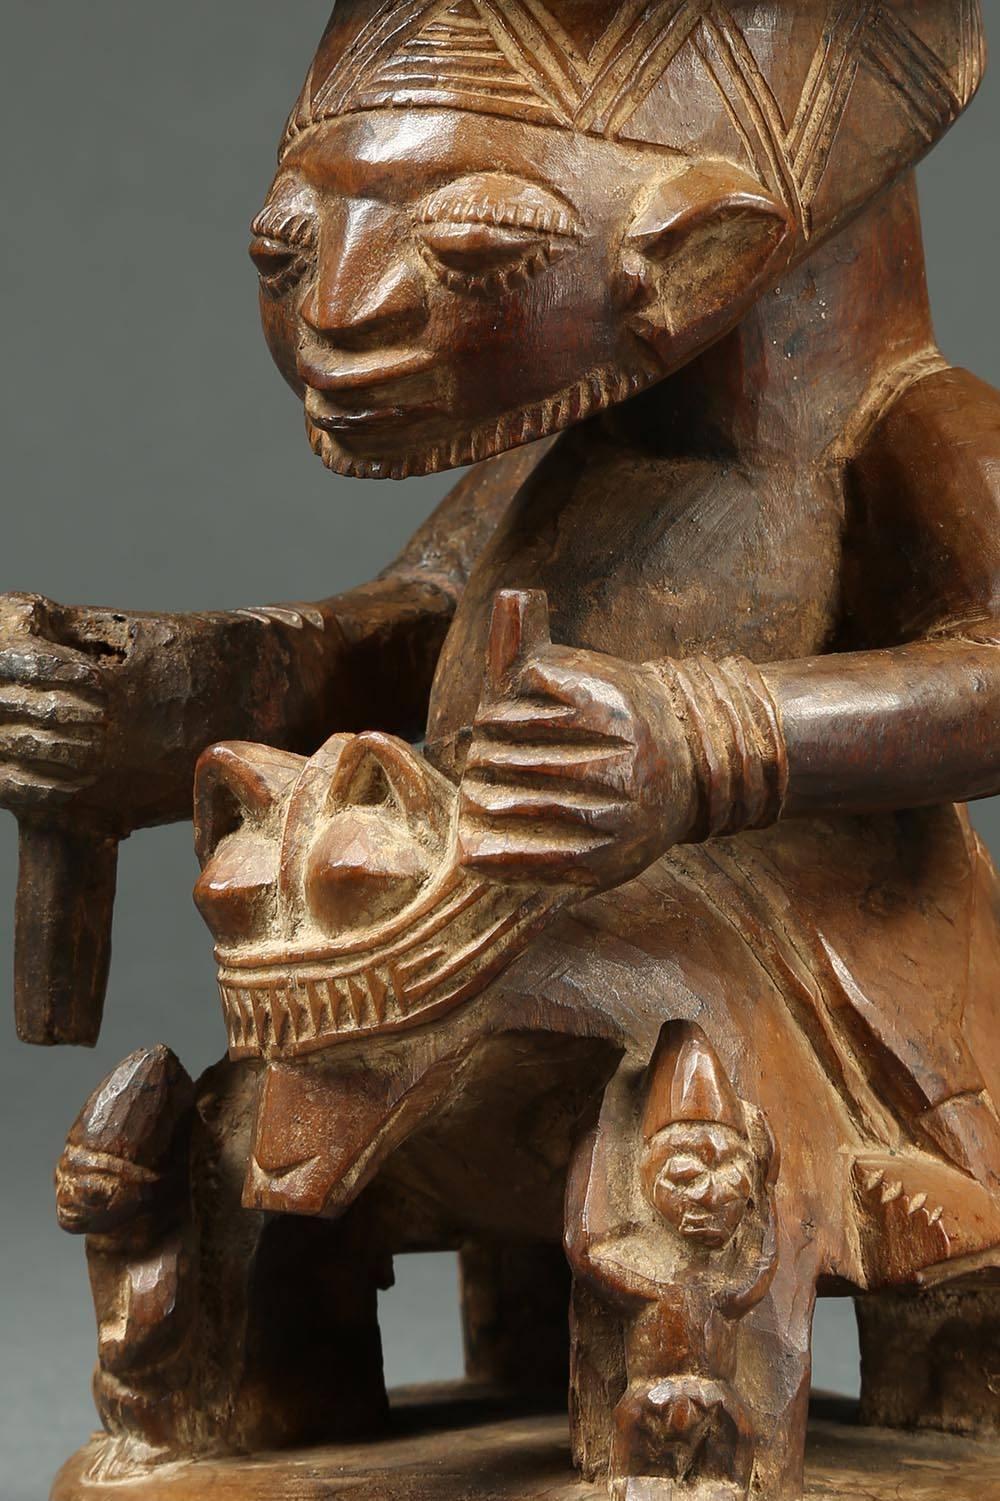 Yoruba tribal offering bowl with horse and rider, Nigeria, 10 1/2 inches tall.

Offering bowl from the Yoruba with a male figure riding a horse, holding onto the reins in one hand, probably once held a sword in the other, top of the sword missing.